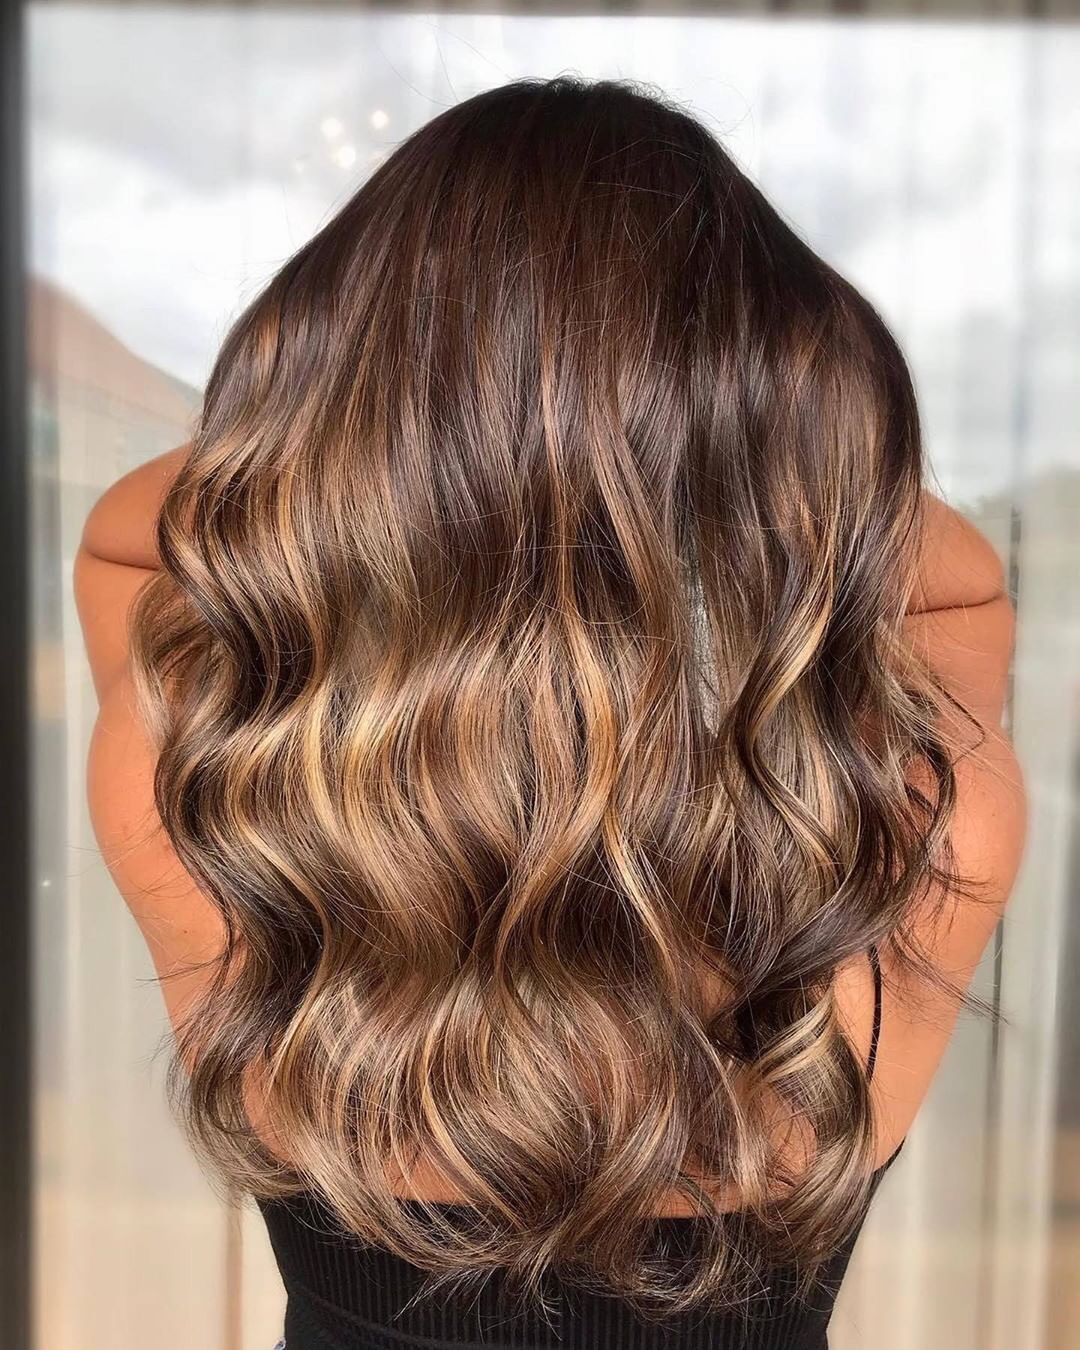 Light Golden Brown Hair Color: What It Looks Like & 17 Trendy Ideas